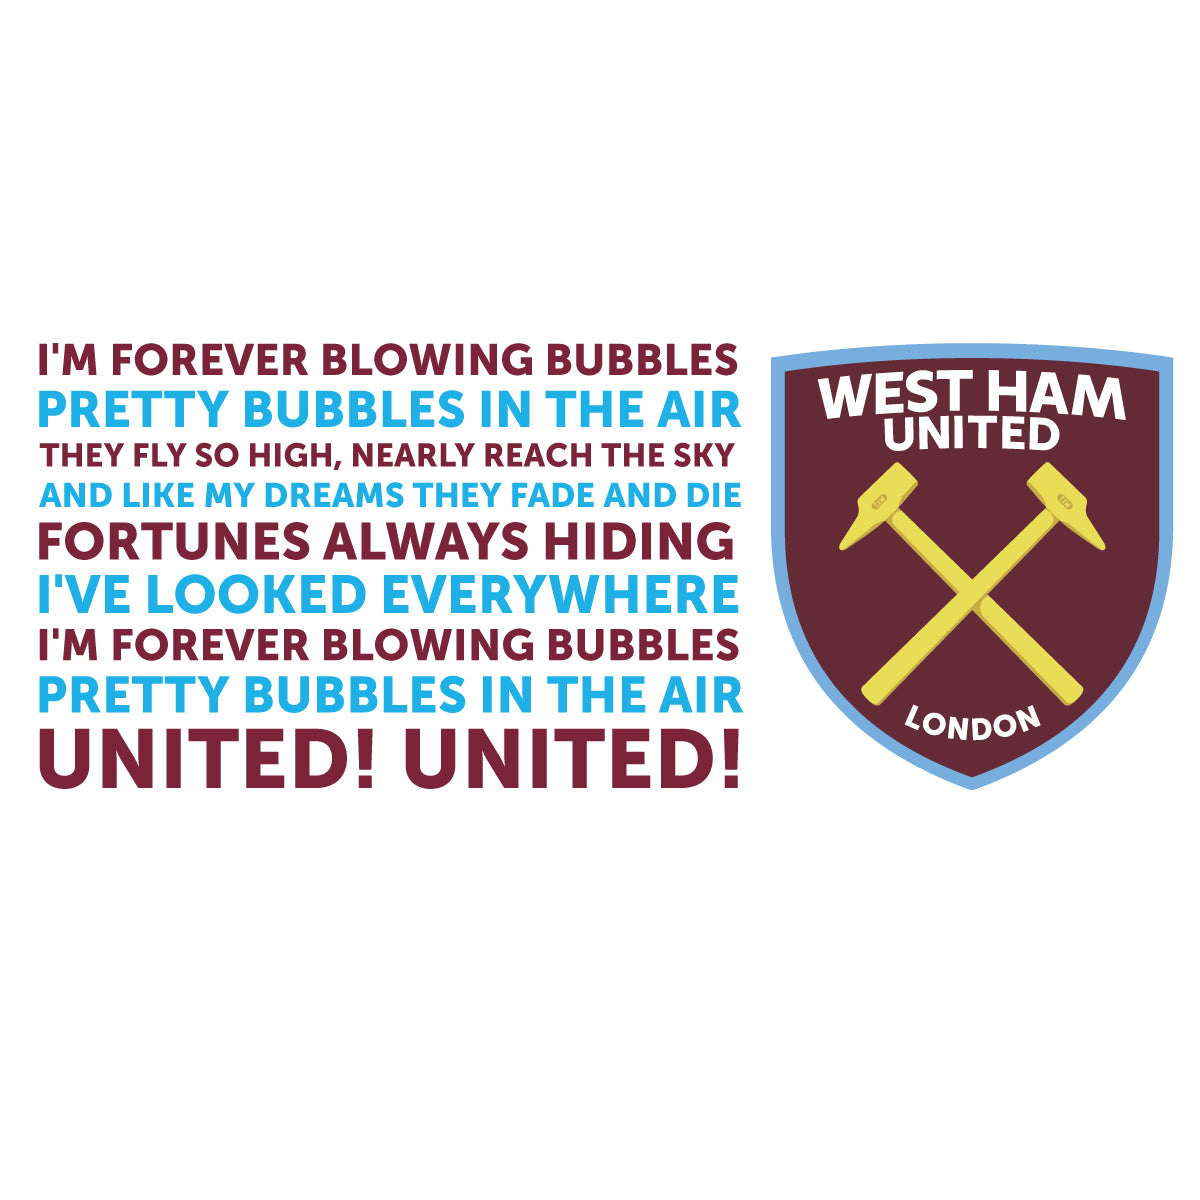 West Ham United Football Club - Blowing Bubbles Song & Crest + Hammers Wall Sticker Set